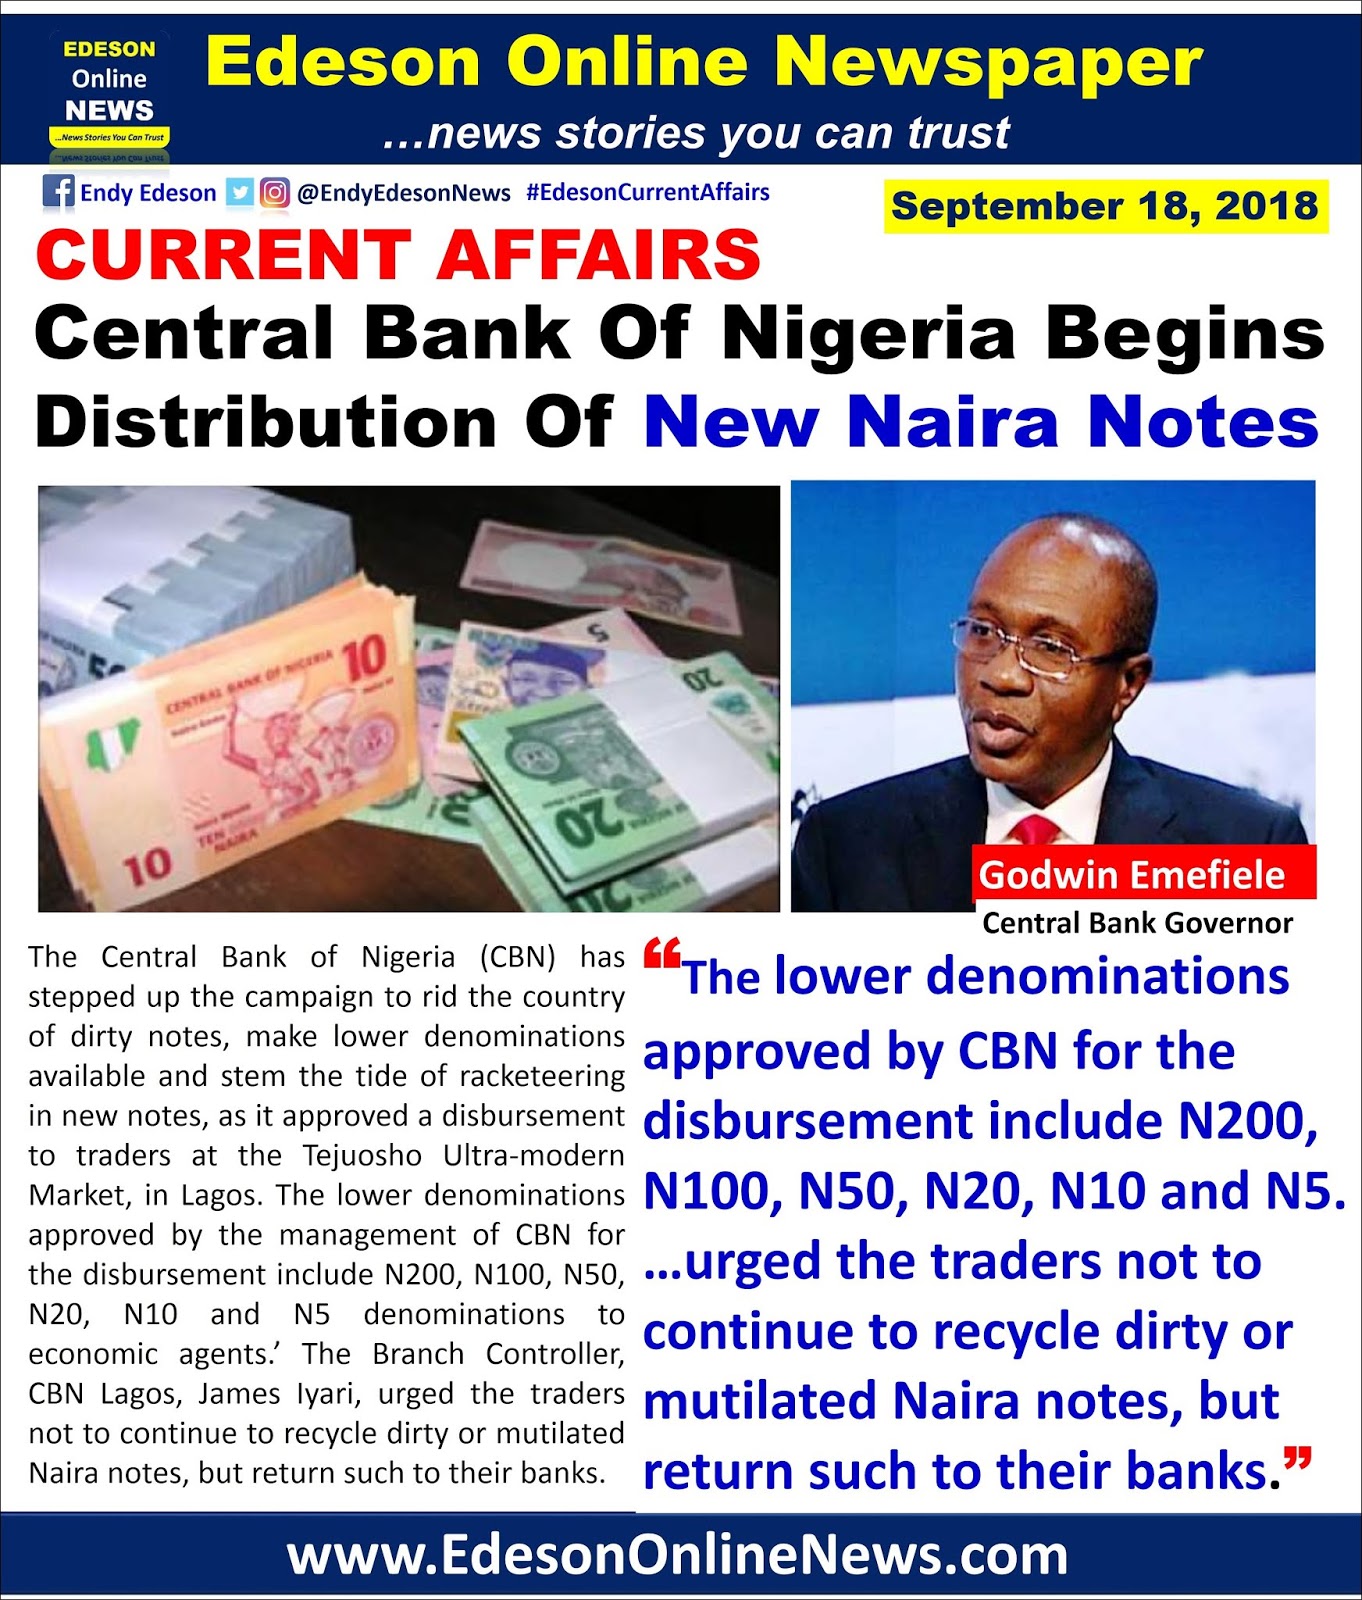 edeson-online-newspaper-central-bank-of-nigeria-begins-distribution-of-new-naira-notes